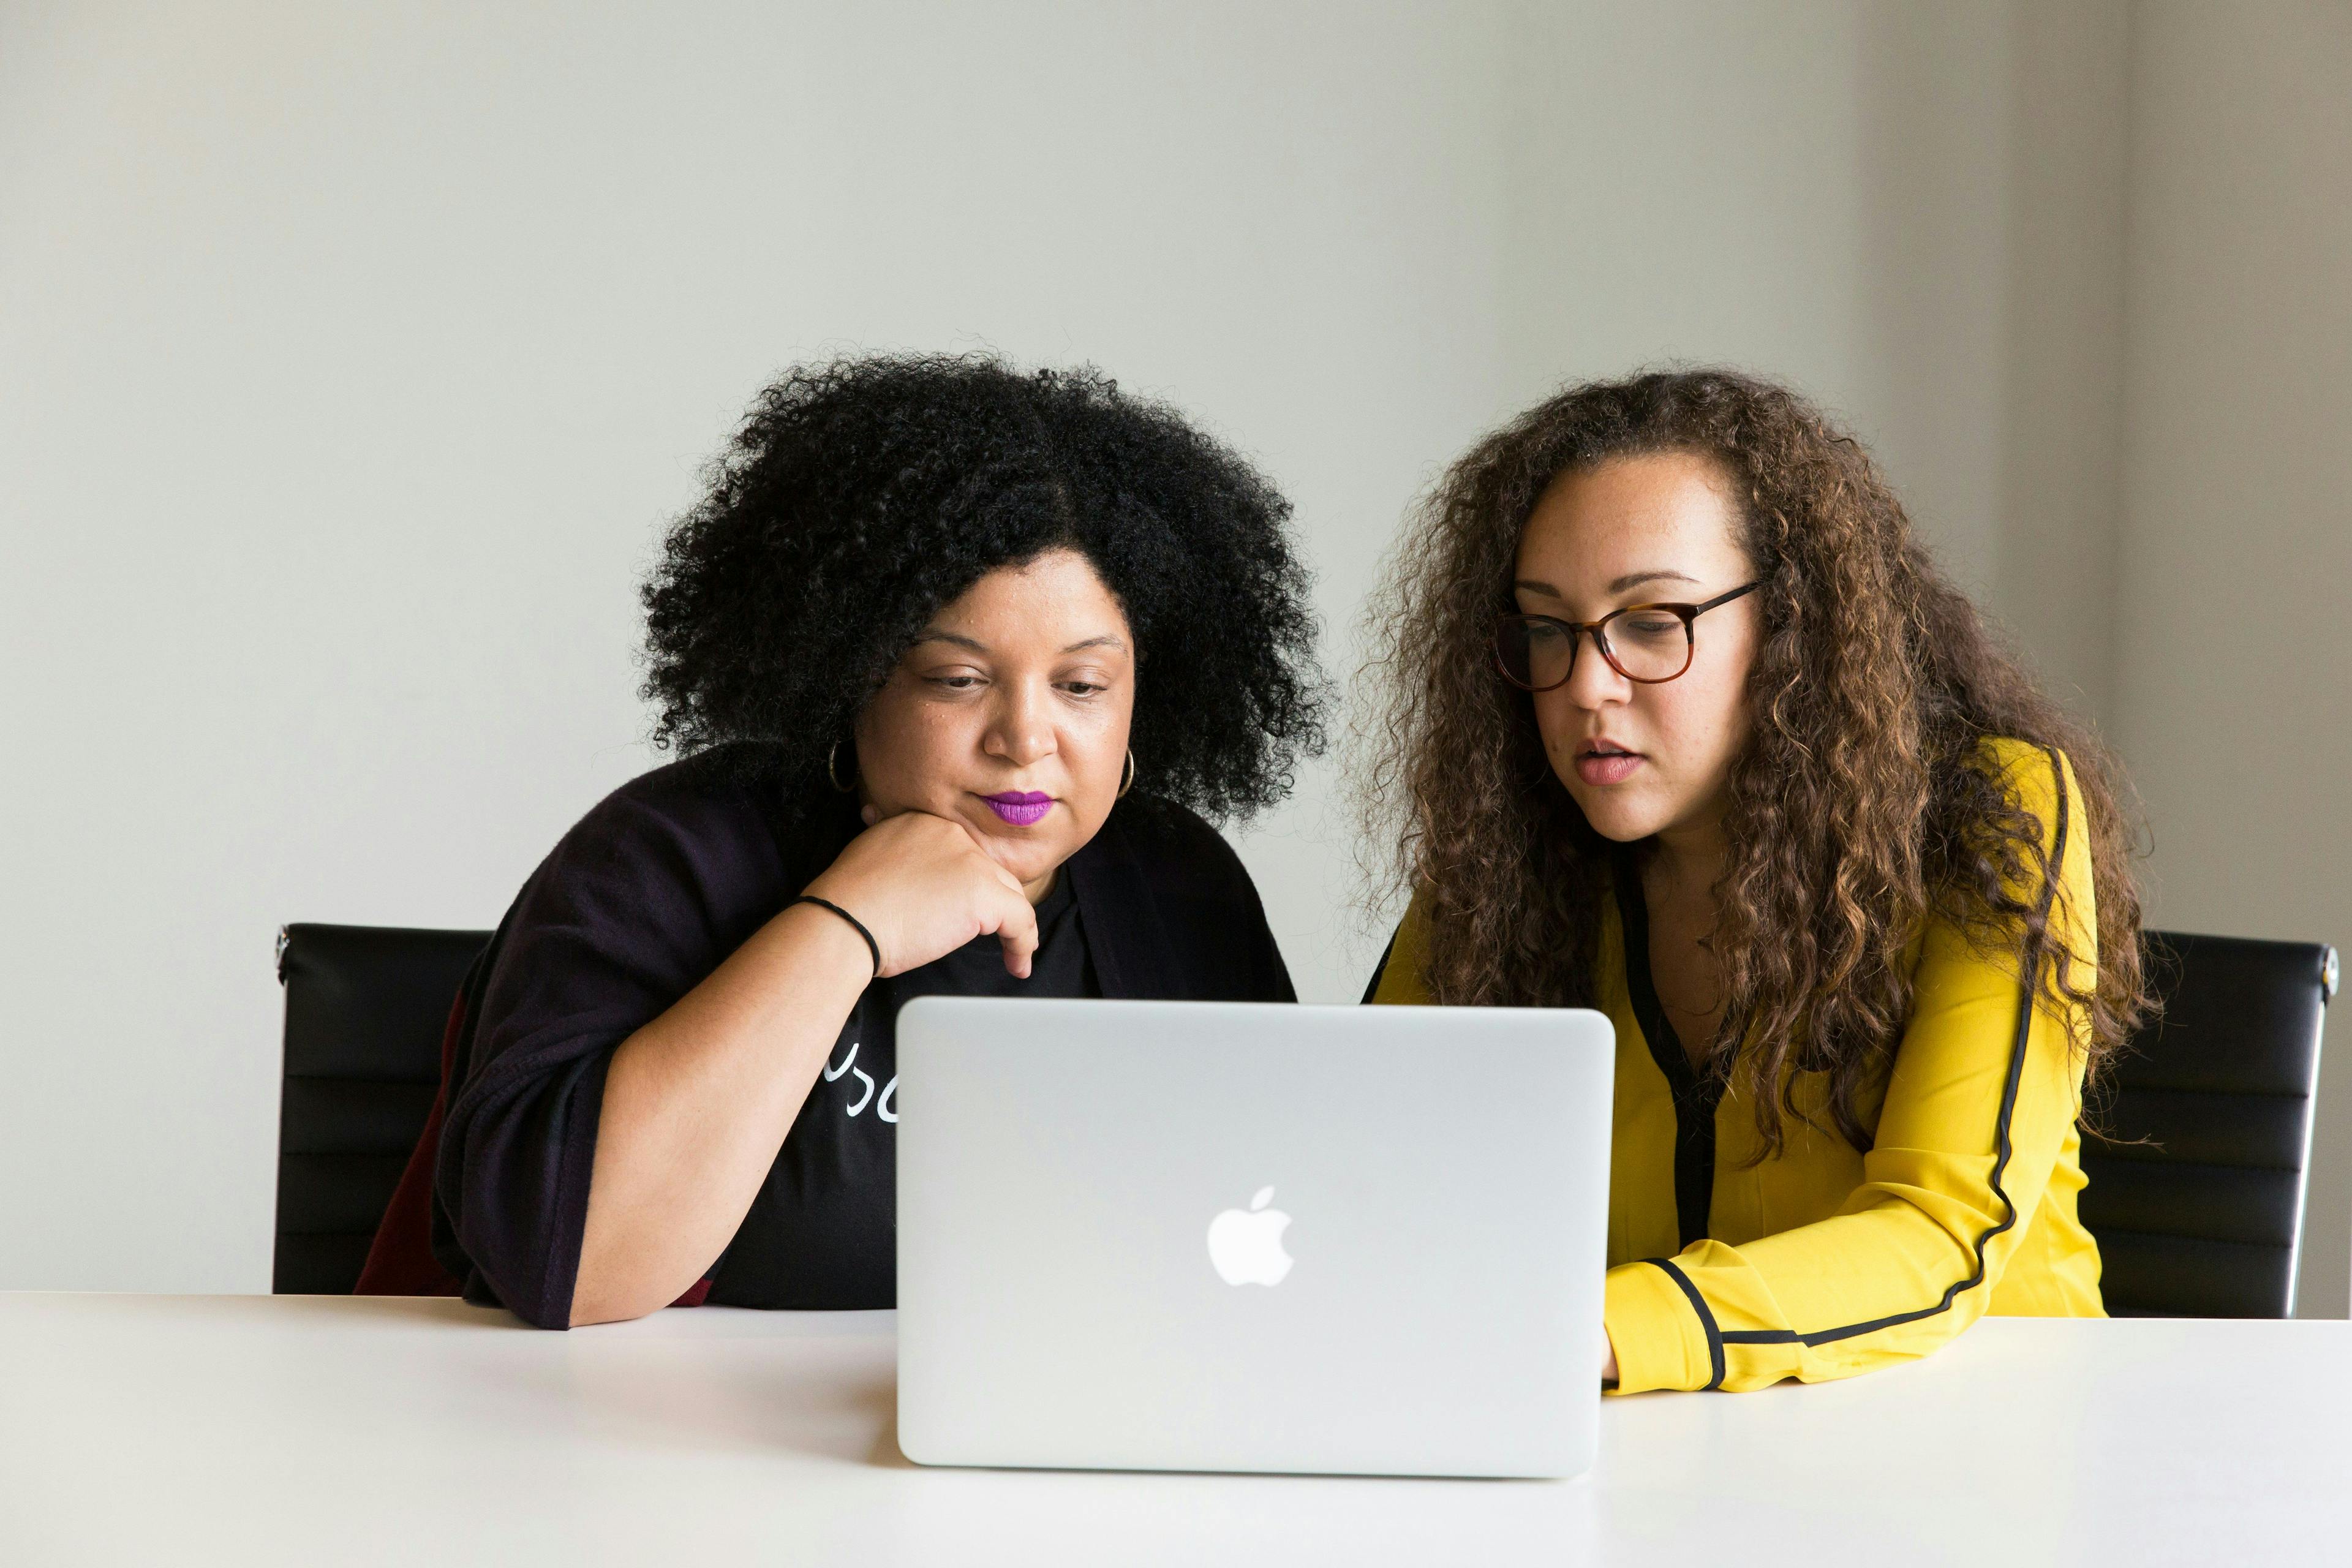 Two women sitting at a table, closely looking at a laptop screen together. One woman is wearing glasses and a yellow top, while the other has curly hair and is wearing a dark top. This focused setting is ideal for analyzing landing page stats.